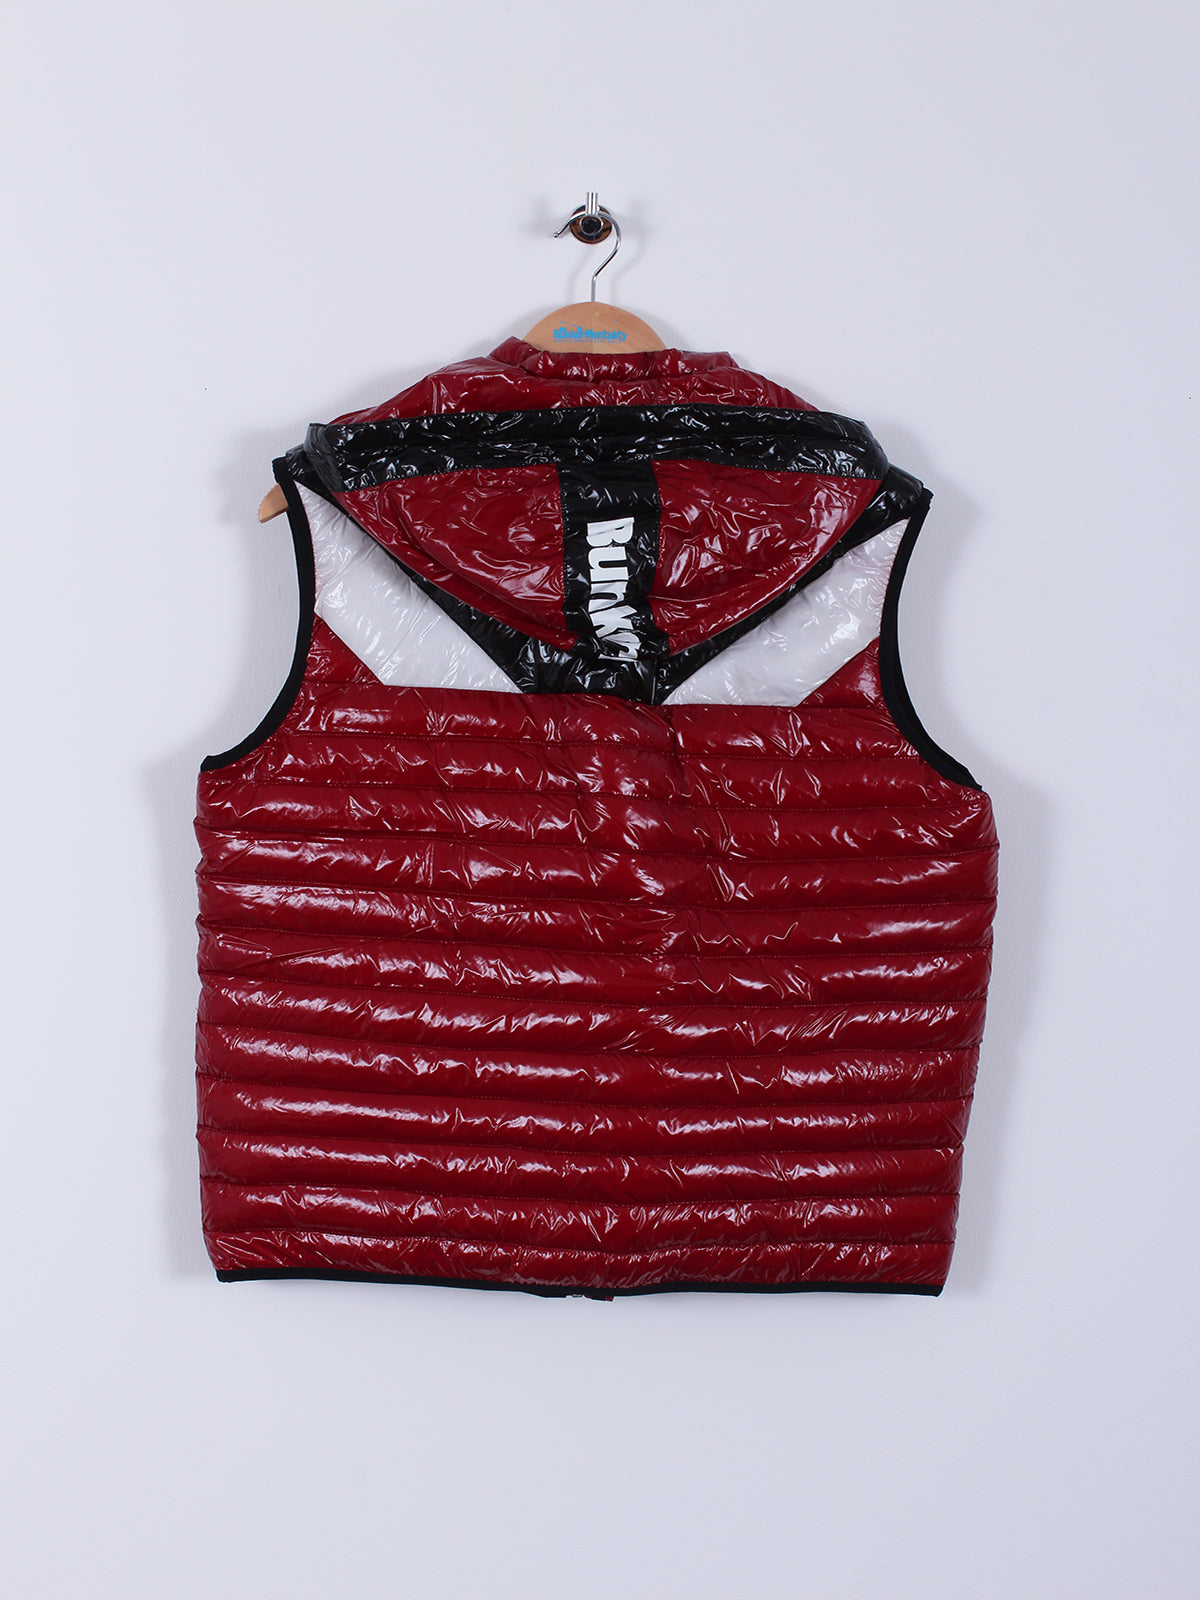 Quilted Polyester Hooded Gilet (Sample) - Black/Red  - X-Small